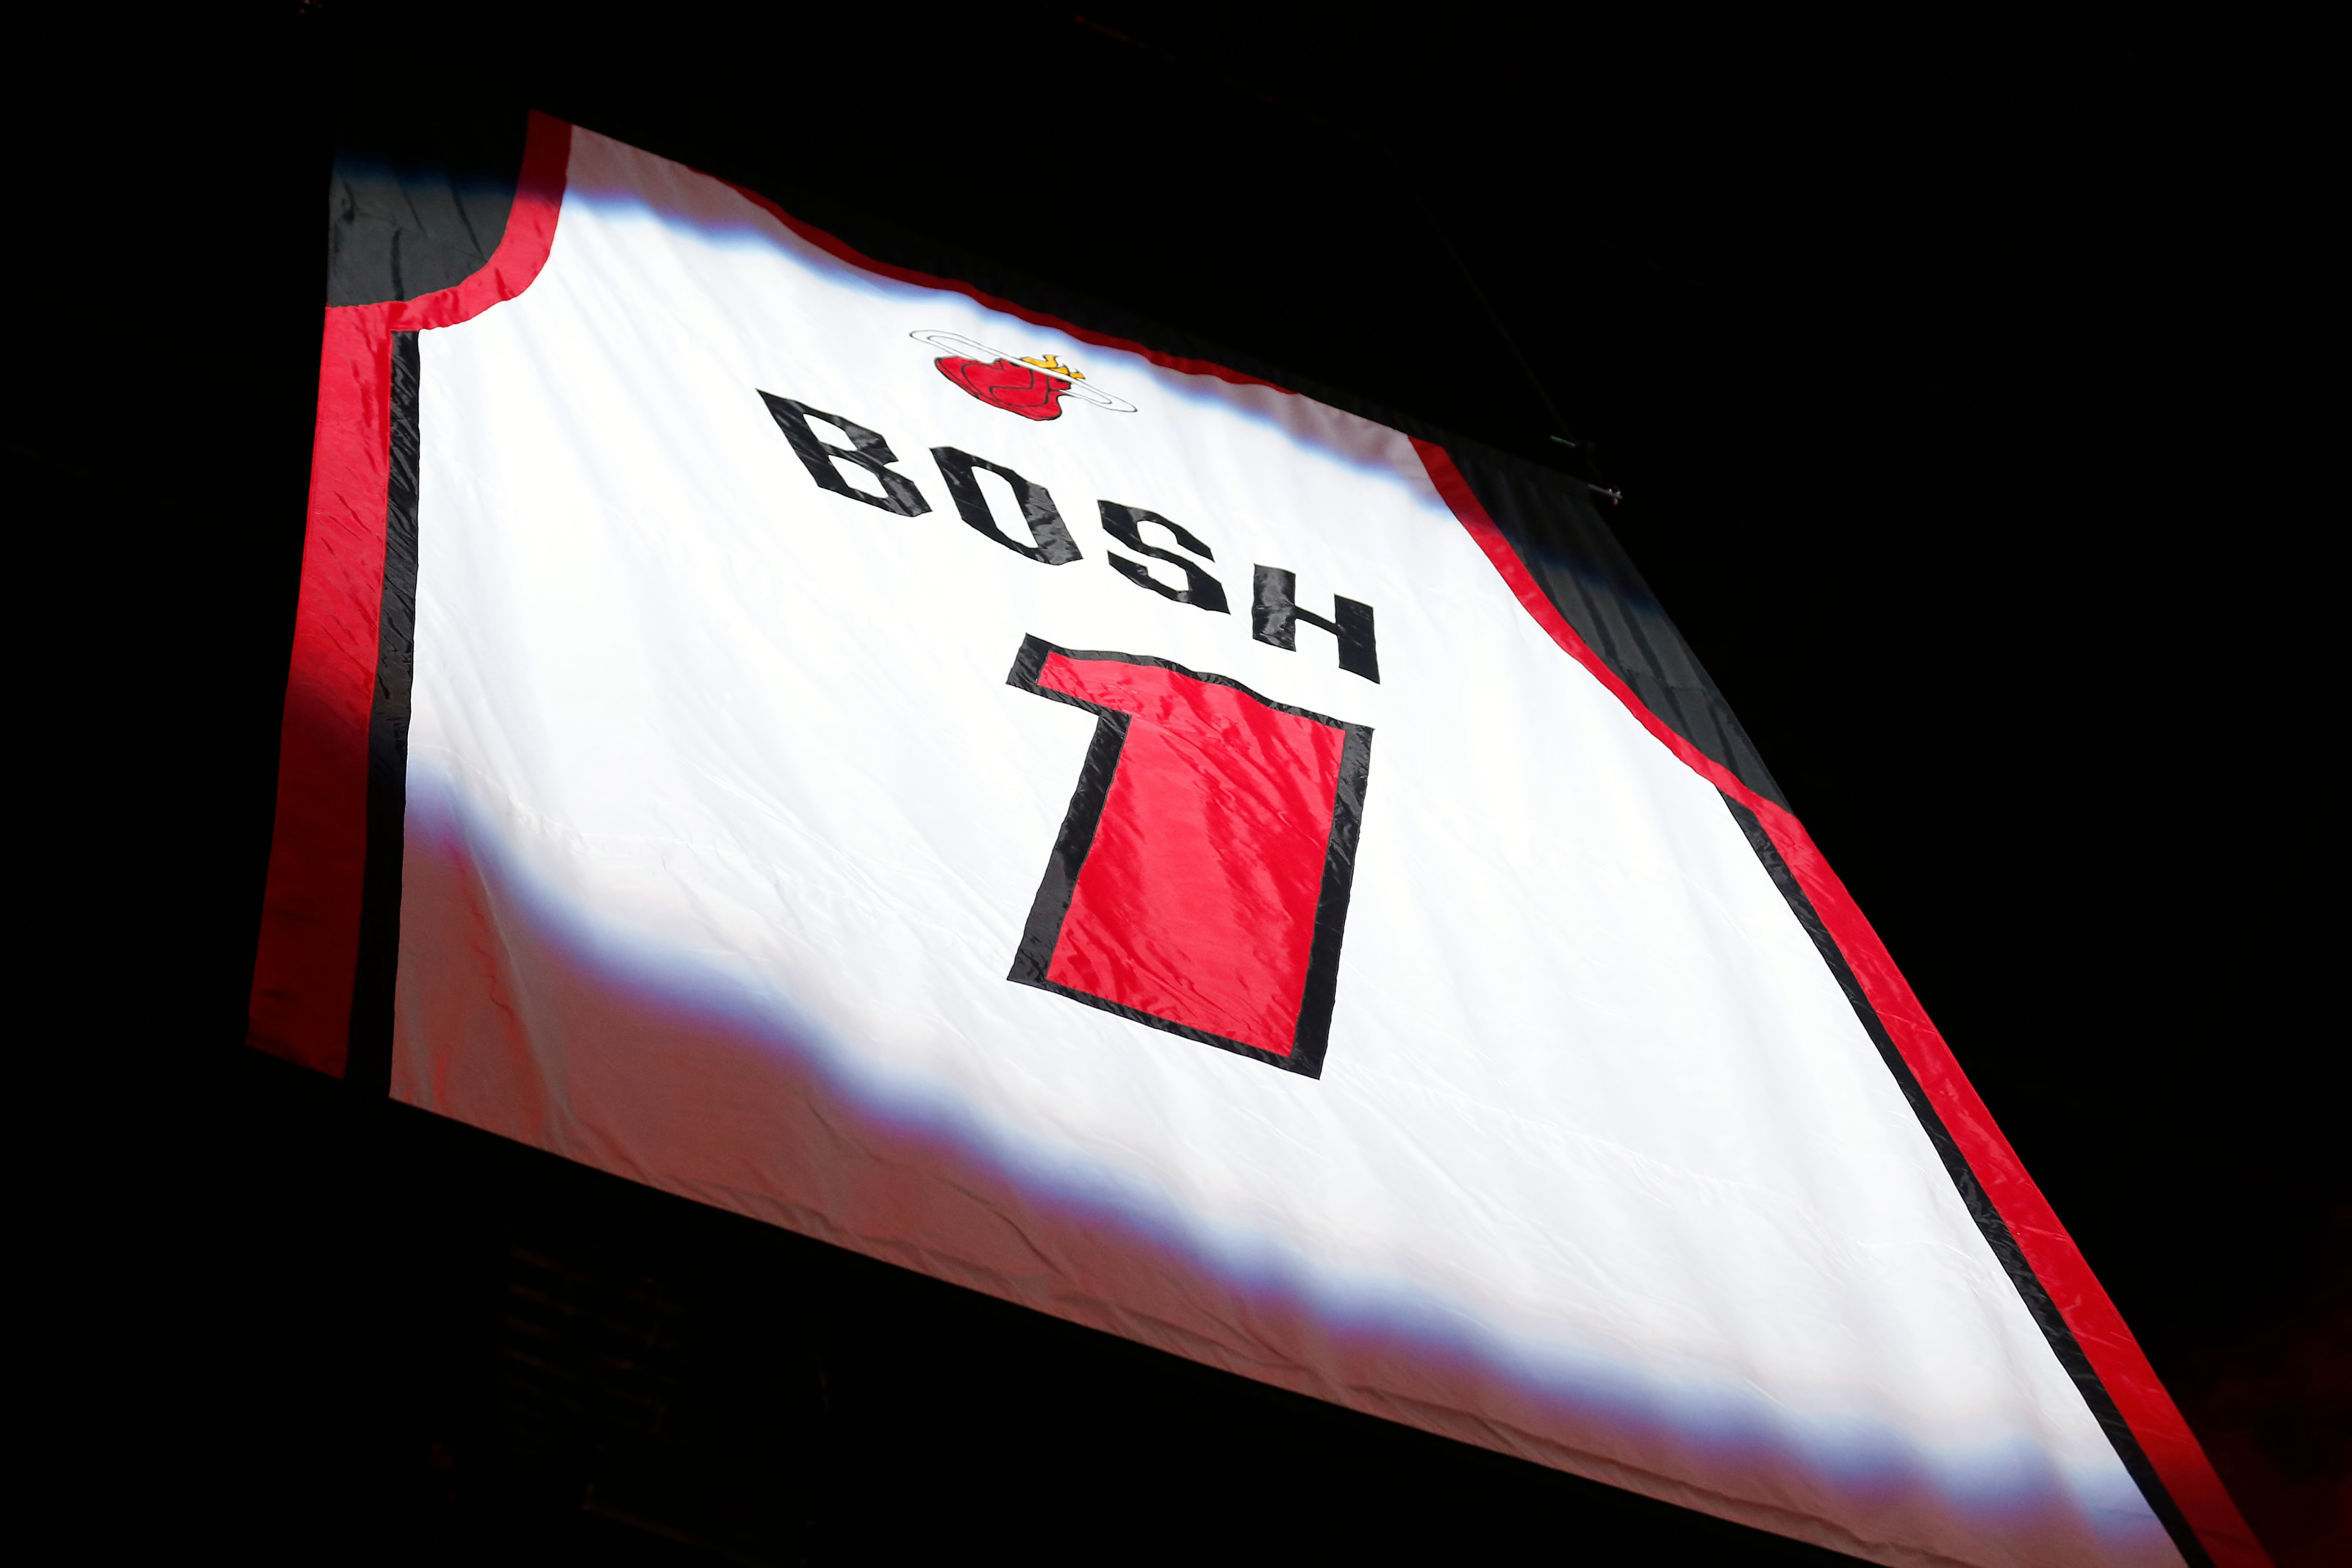 Miami Heat retired jersey numbers hang in the rafters at Kaseya News  Photo - Getty Images